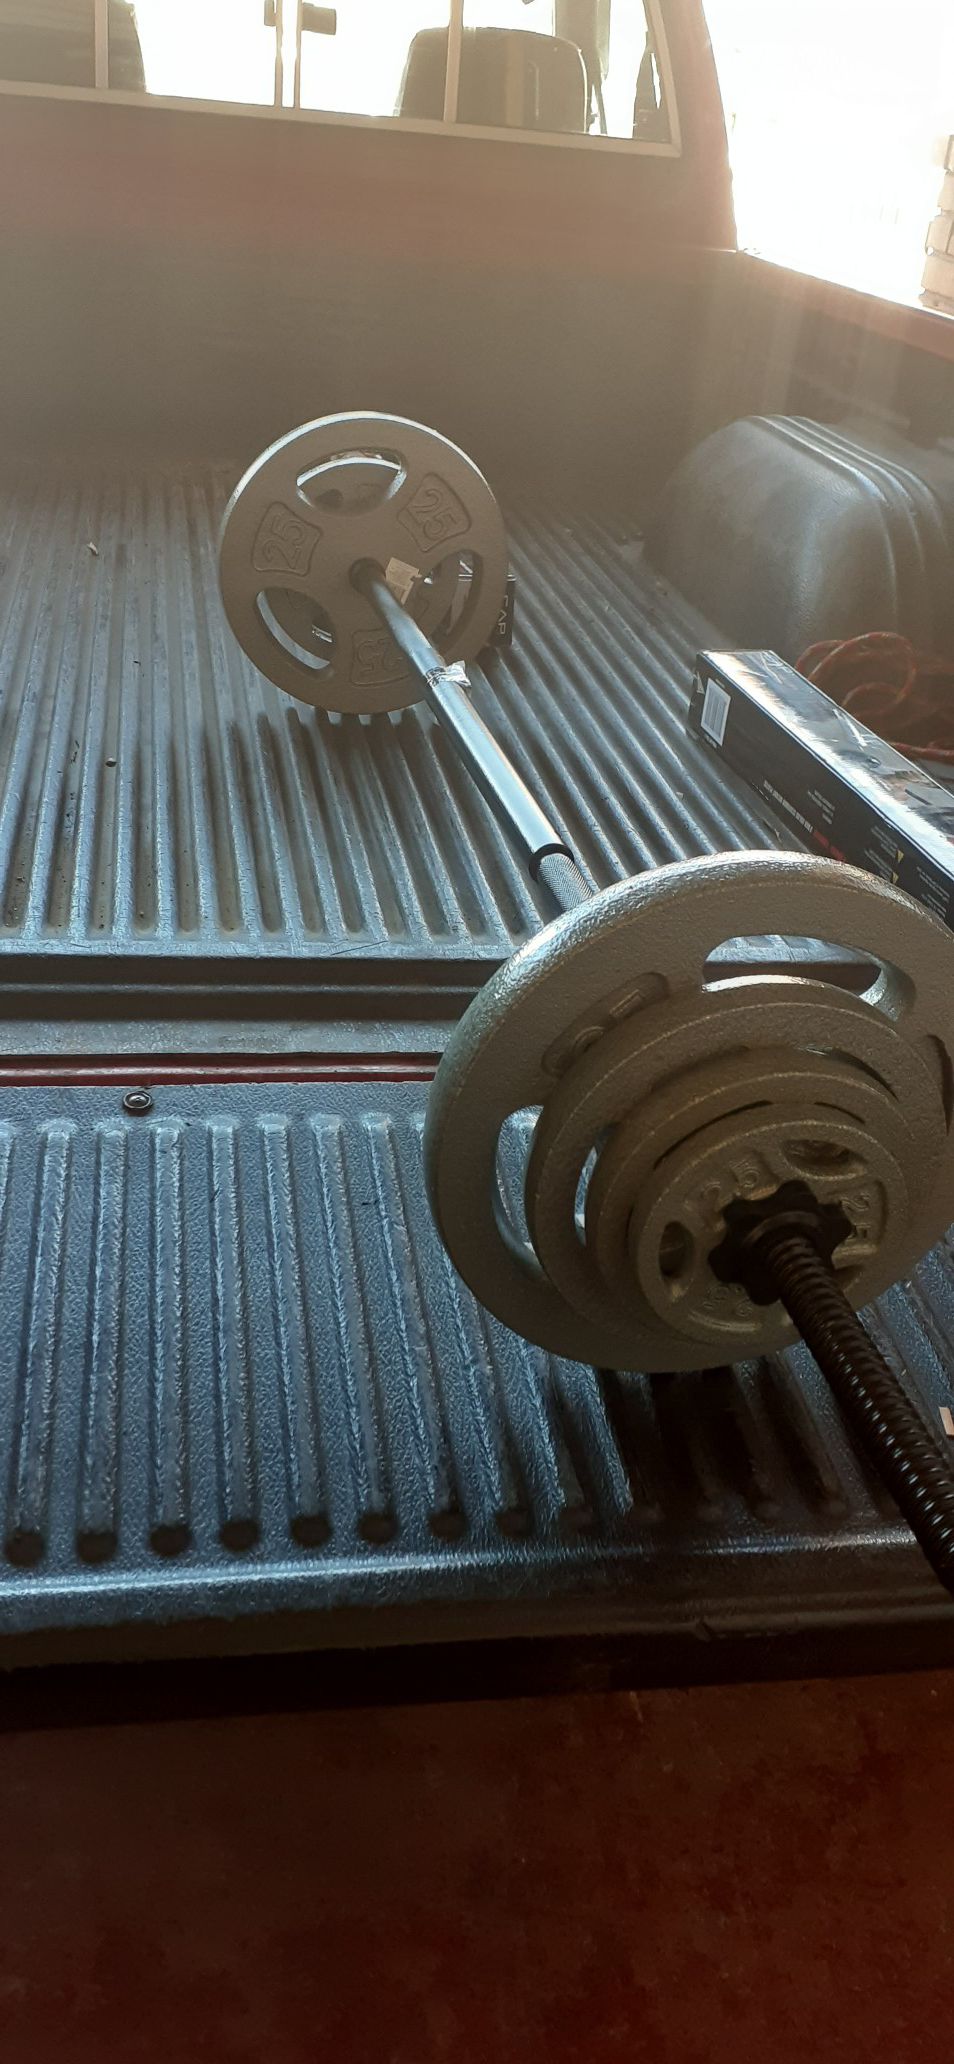 Bar with weights